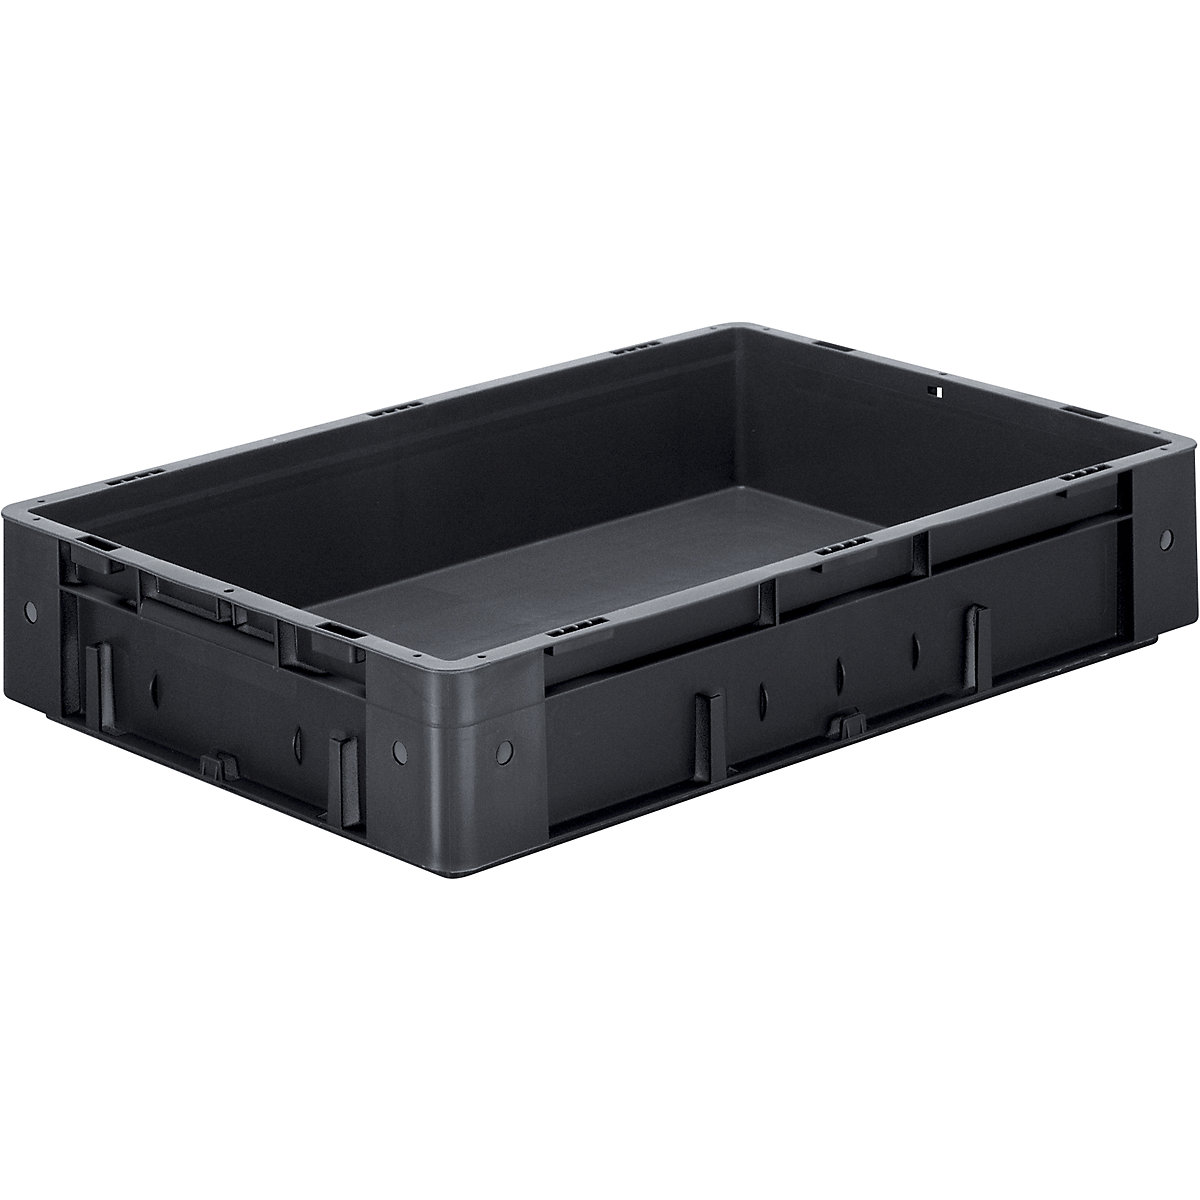 ESD heavy duty EURO-size container, made of polypropylene, LxWxH 600 x 400 x 120 mm, pack of 2-3